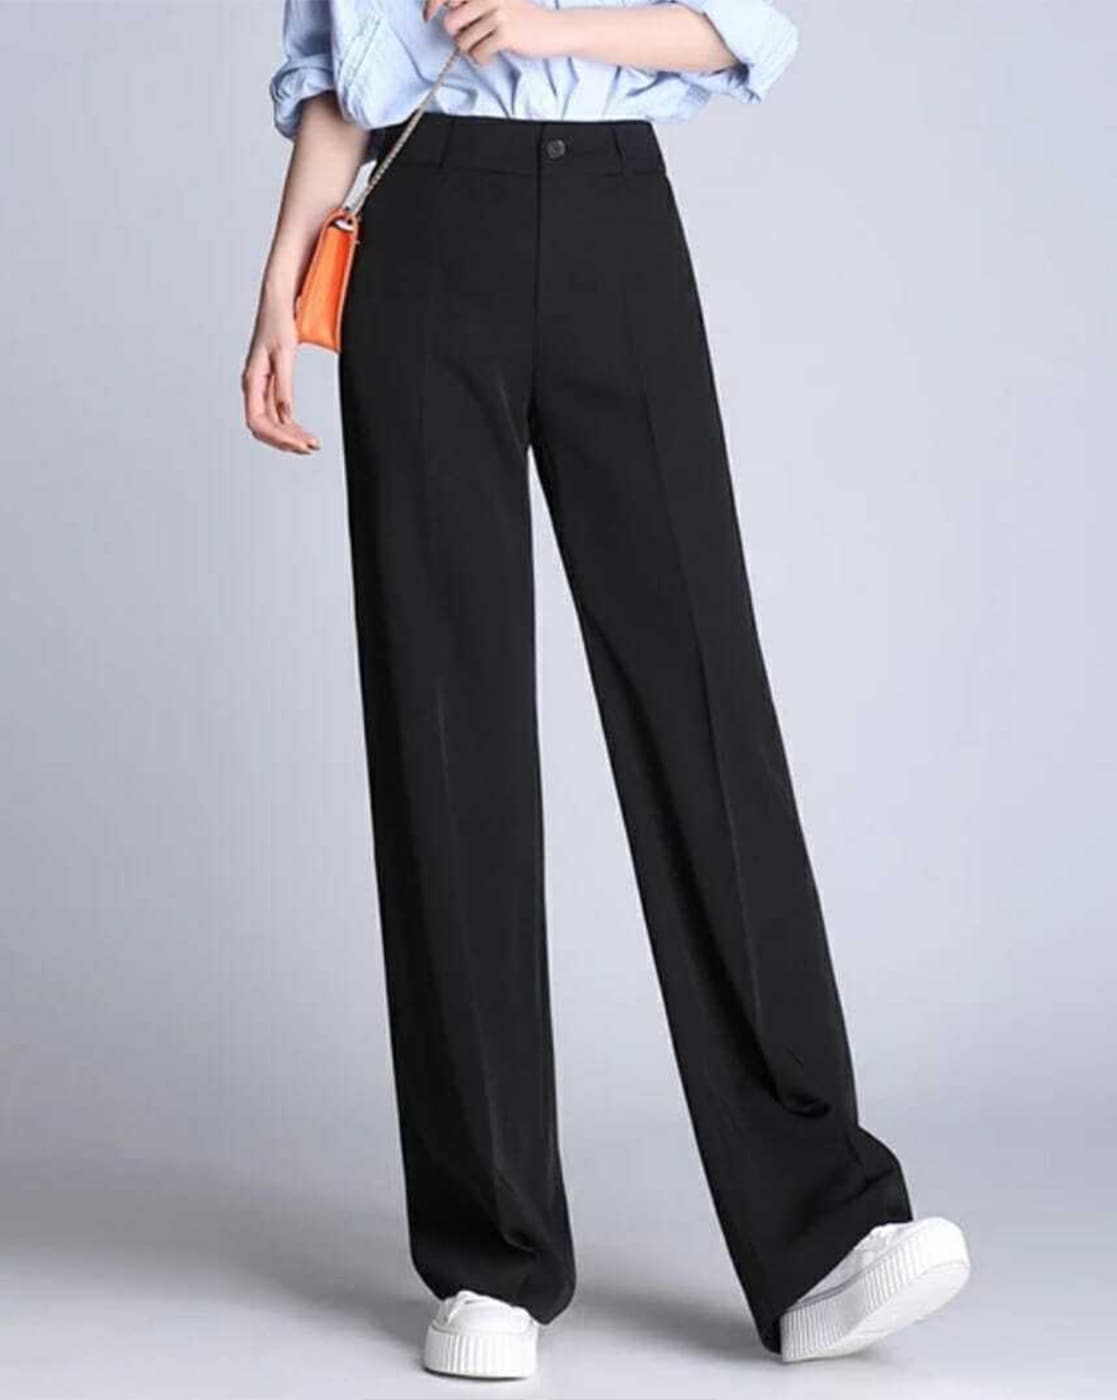 28 Pairs of Flared Pants, Wide-Leg Trousers, and Bell-Bottoms to Shop Now |  Vogue